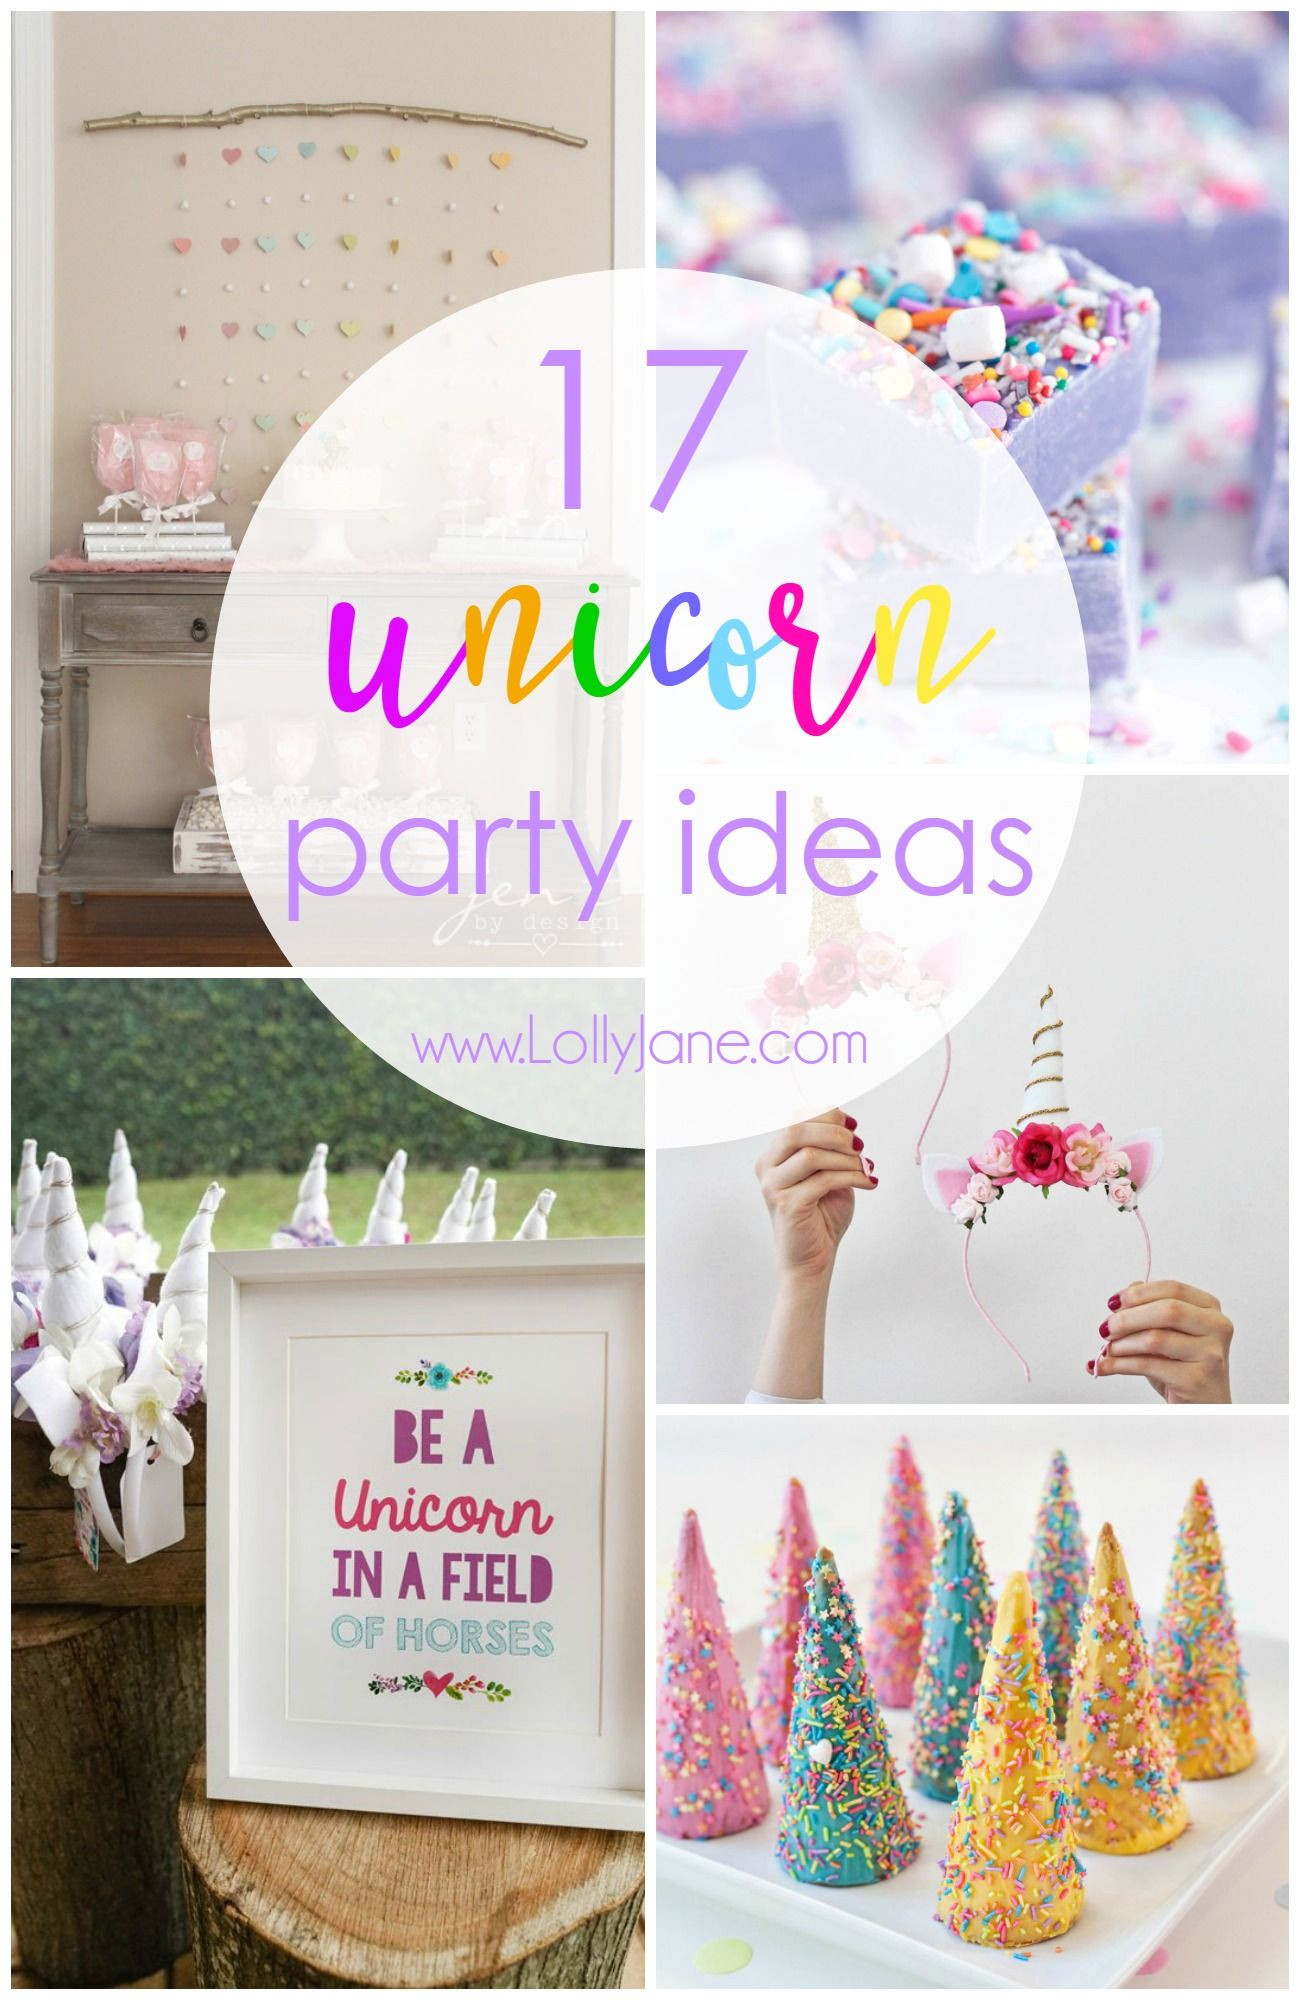 Rainbow And Unicorn Party Ideas
 17 Unicorn Party Ideas To Throw The Ultimate Unicorn Party